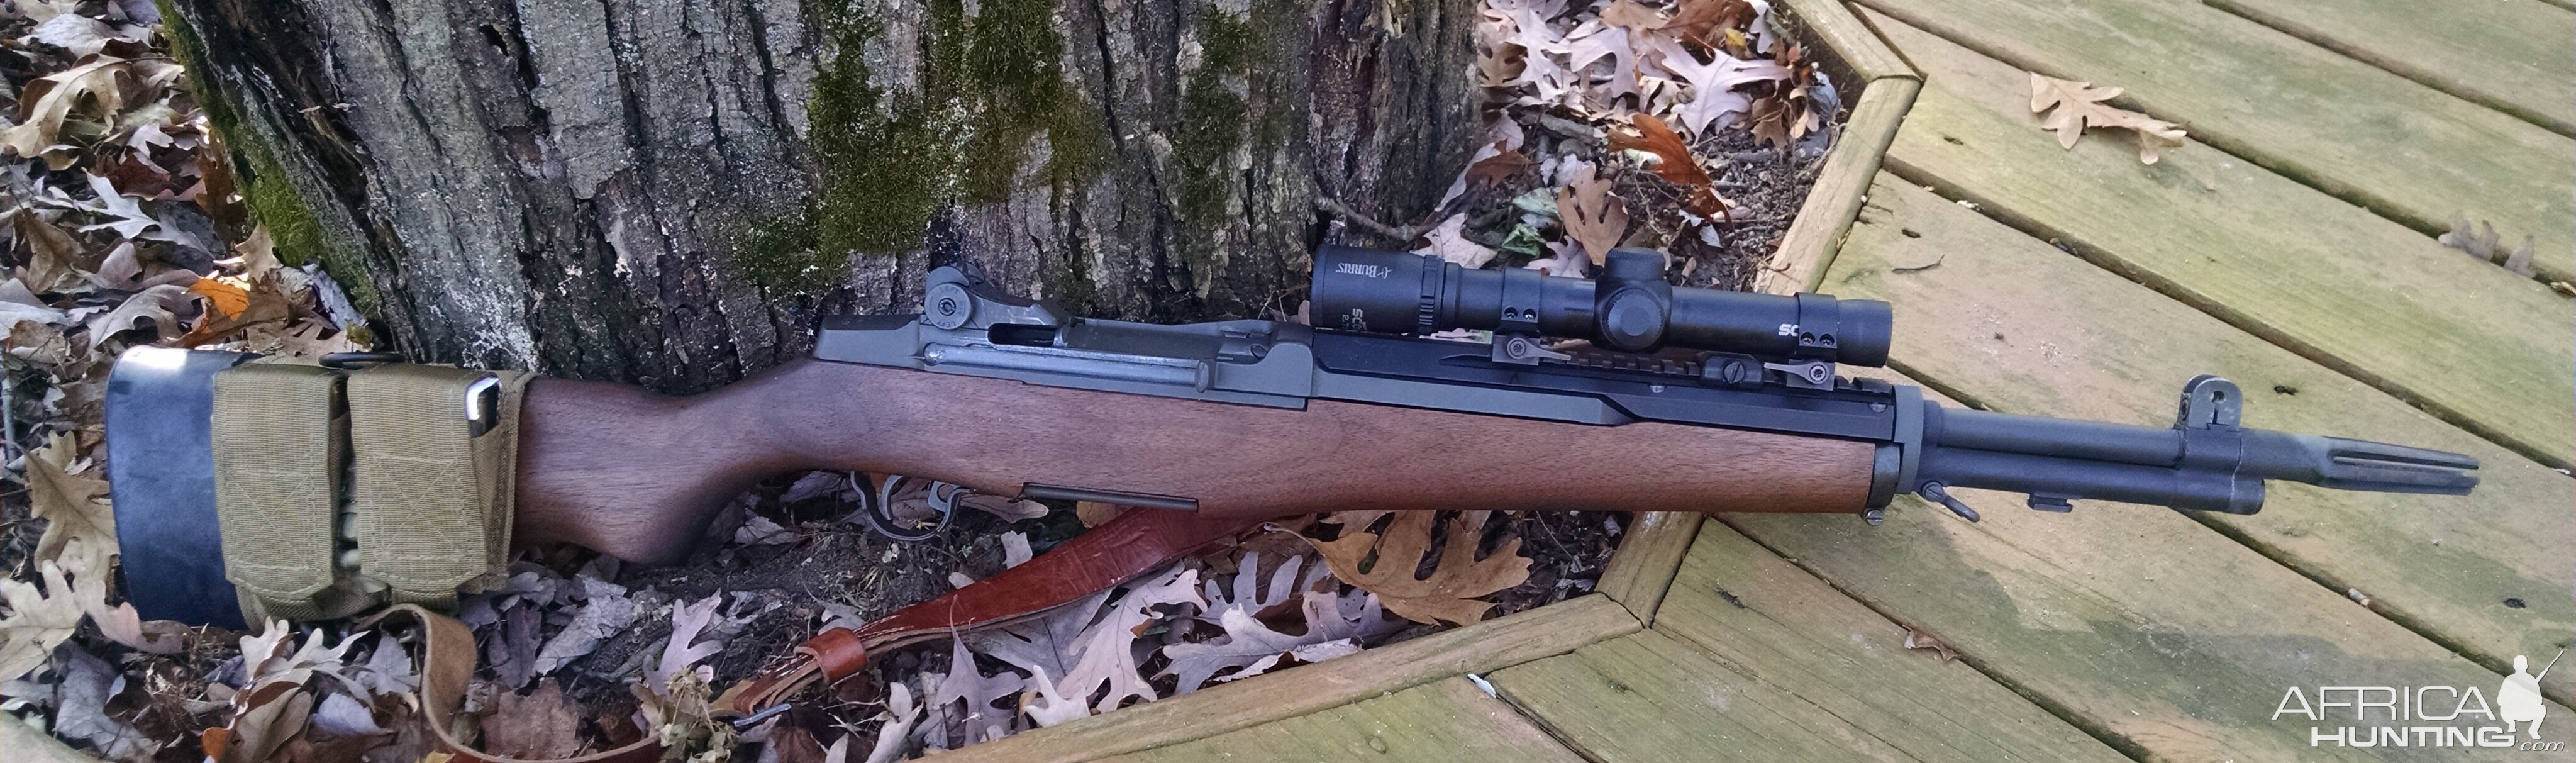 16.1" Mini-G Hunting Carbine Built By Schuff's